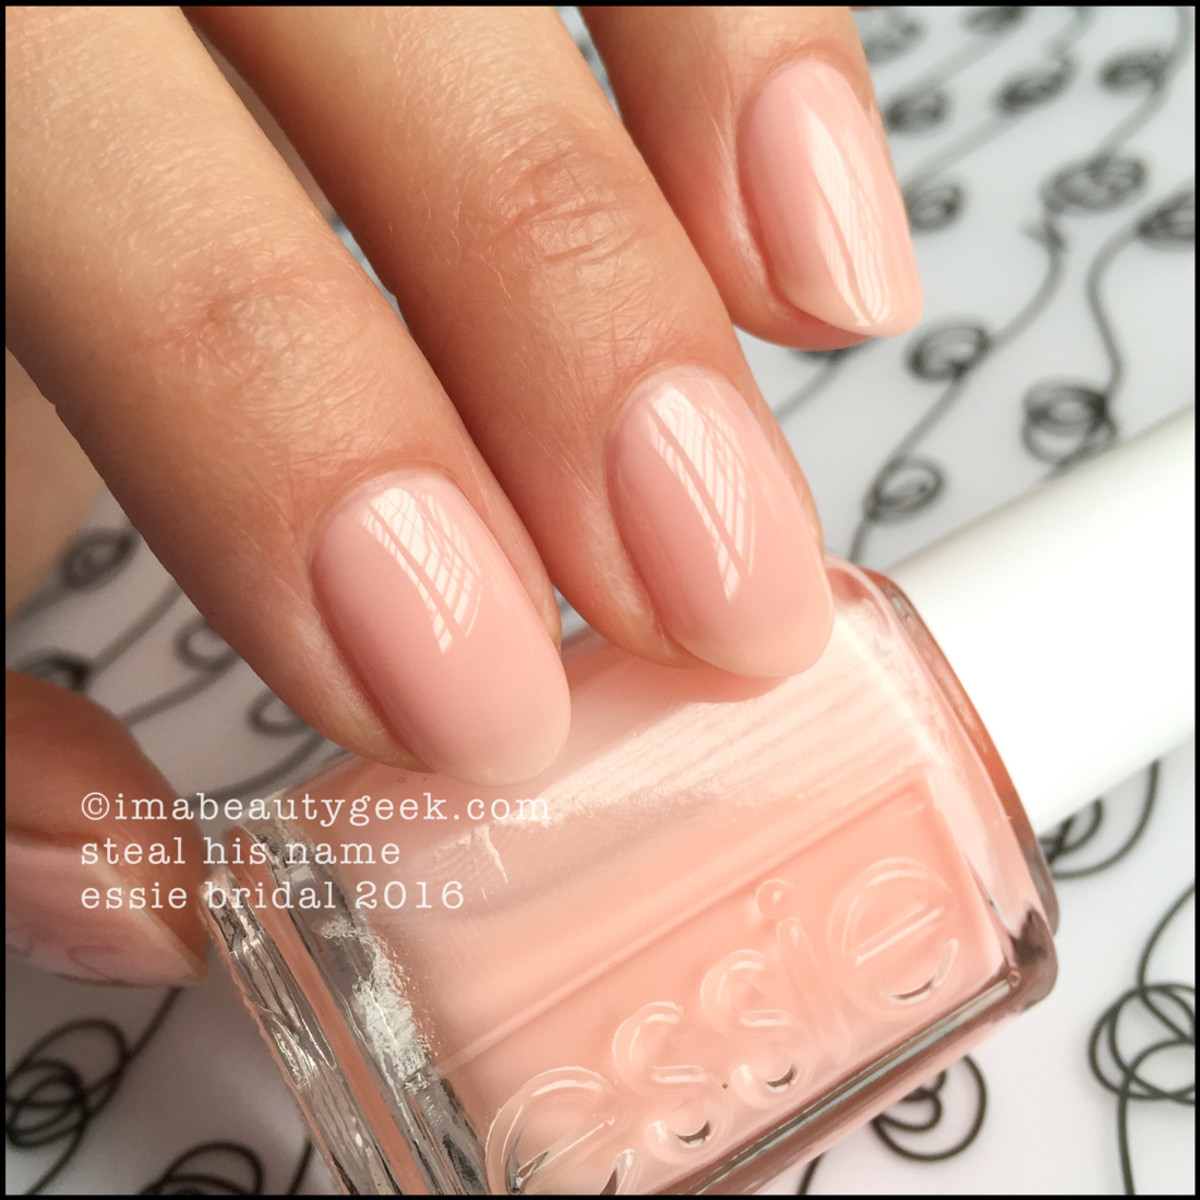 Essie Steal His Name_Essie Bridal 2016 Swatches Review